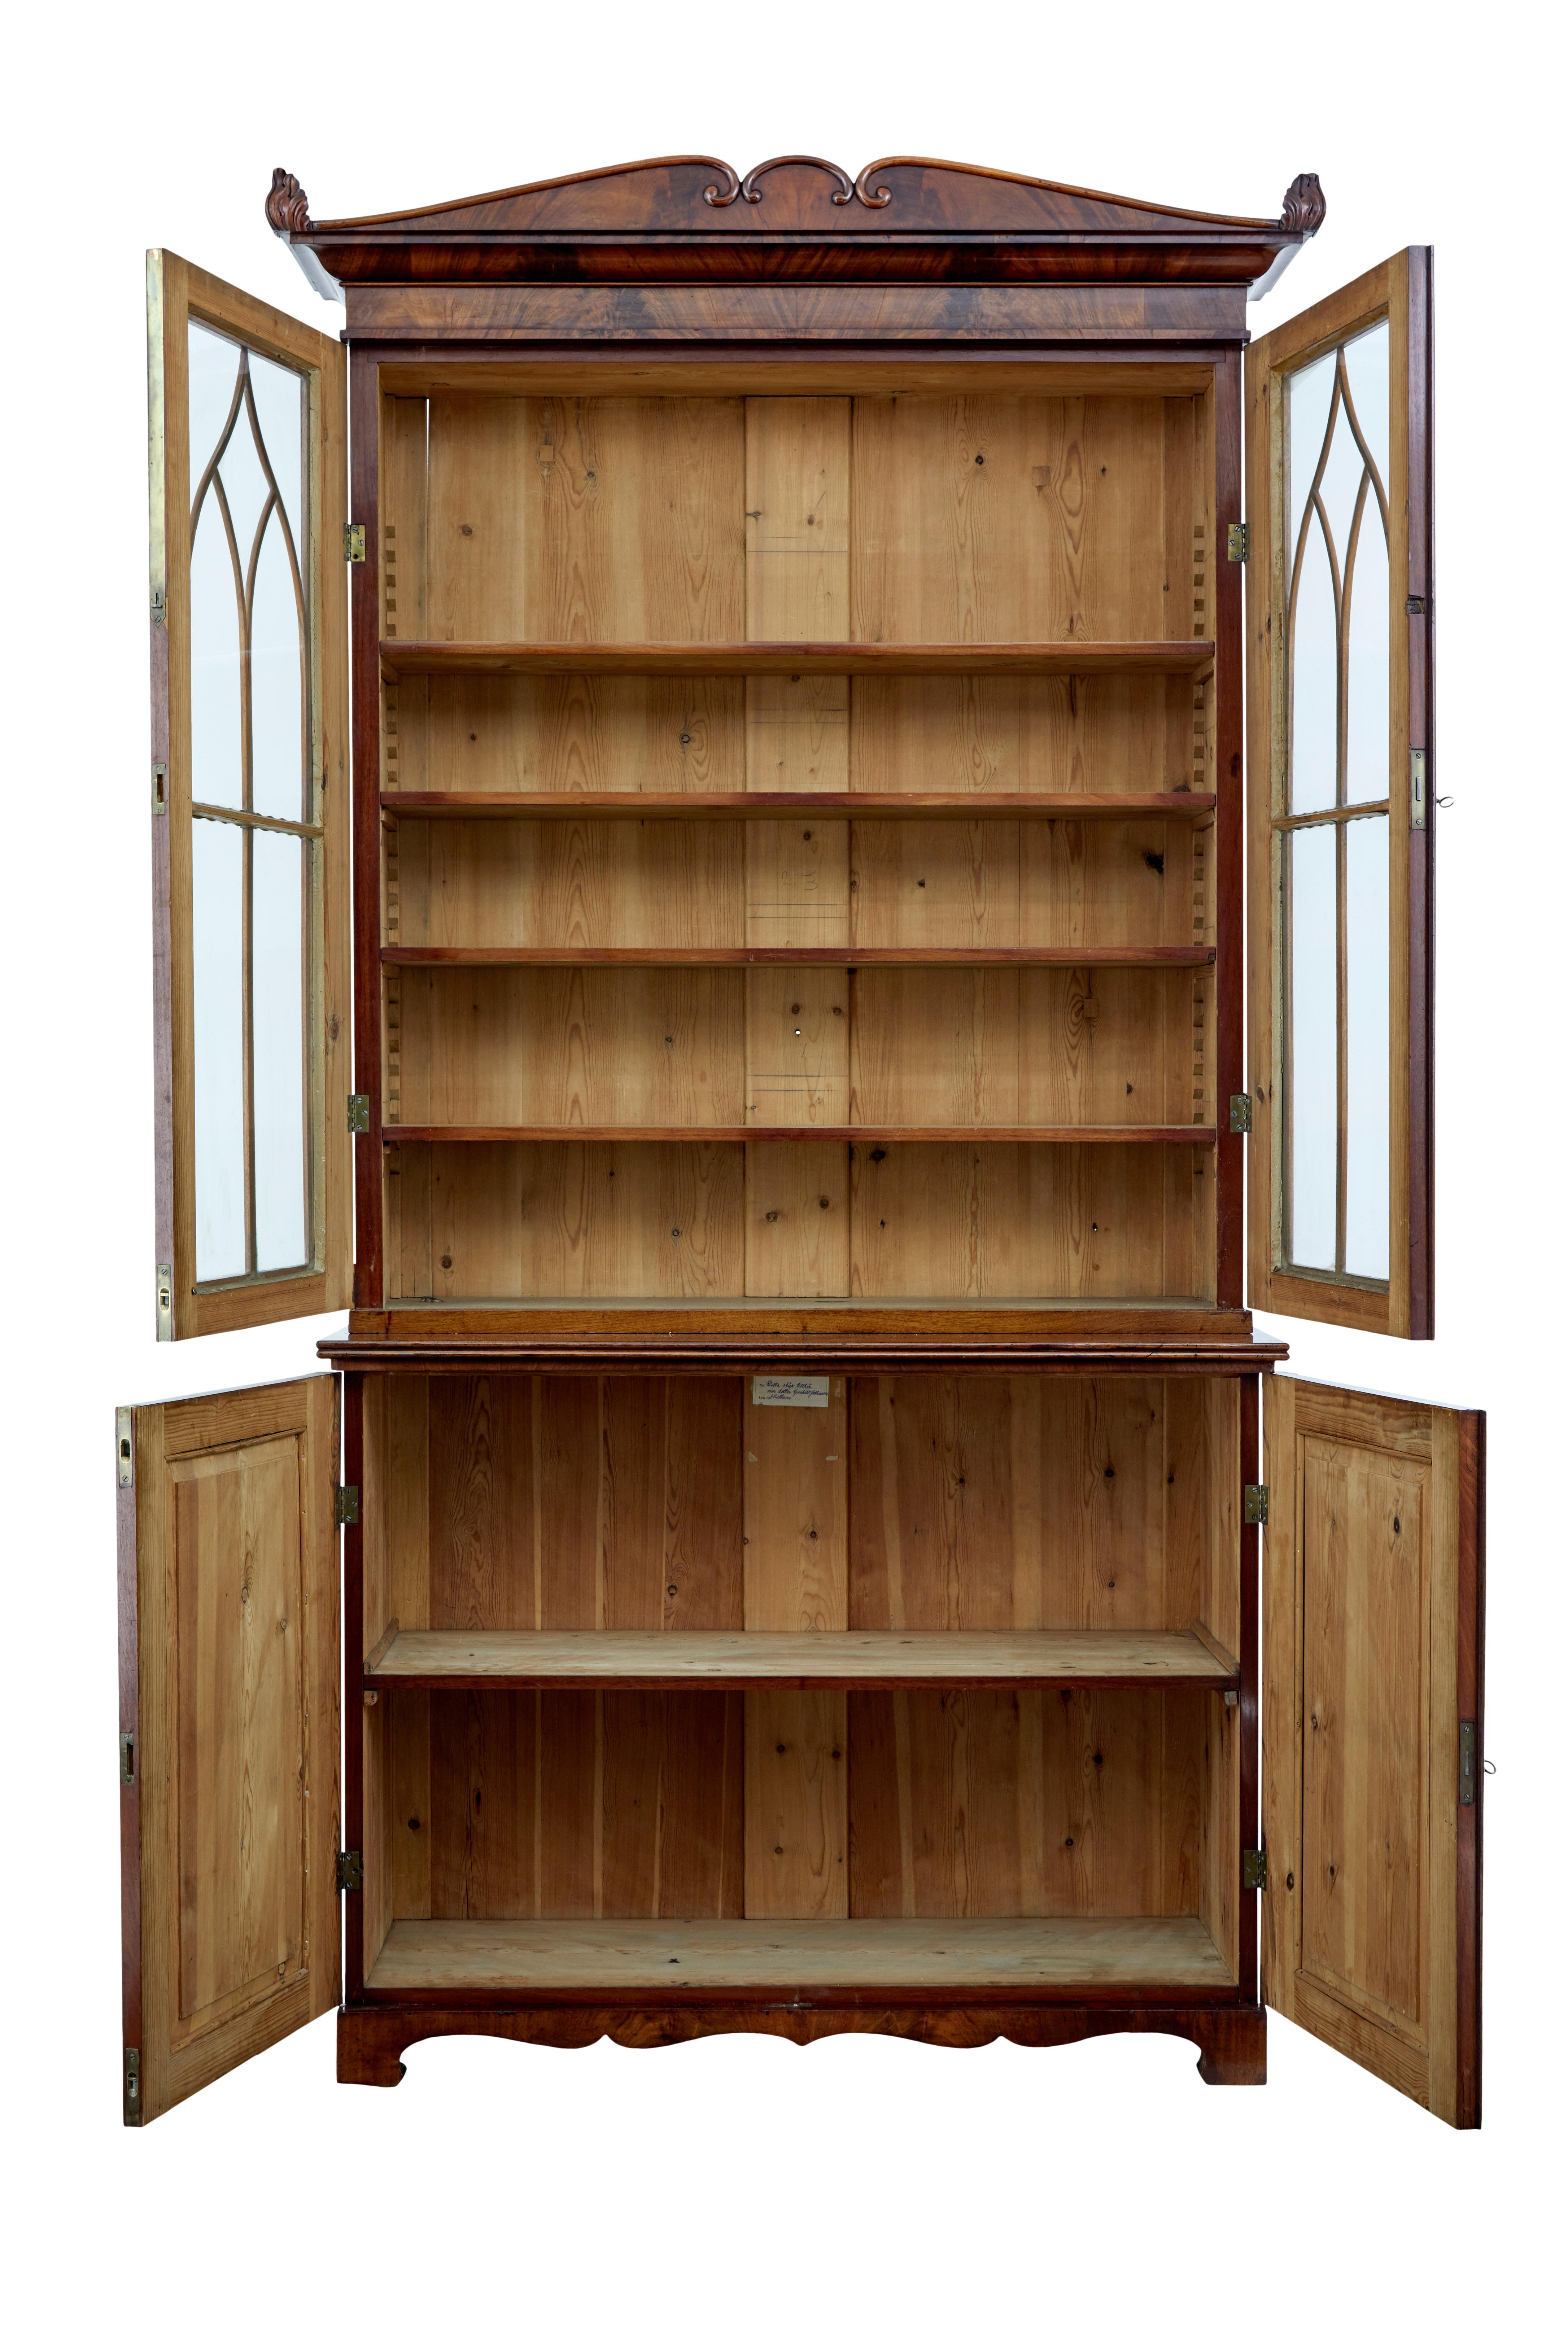 Fine example of a regency period bookcase, circa 1820.

Very much in the manor of Thomas hope. Matching flame mahogany veneers from top to bottom. Comprising of 3 sections, lower cabinet, glazed cabinet and removable cornice.

Shaped cornice